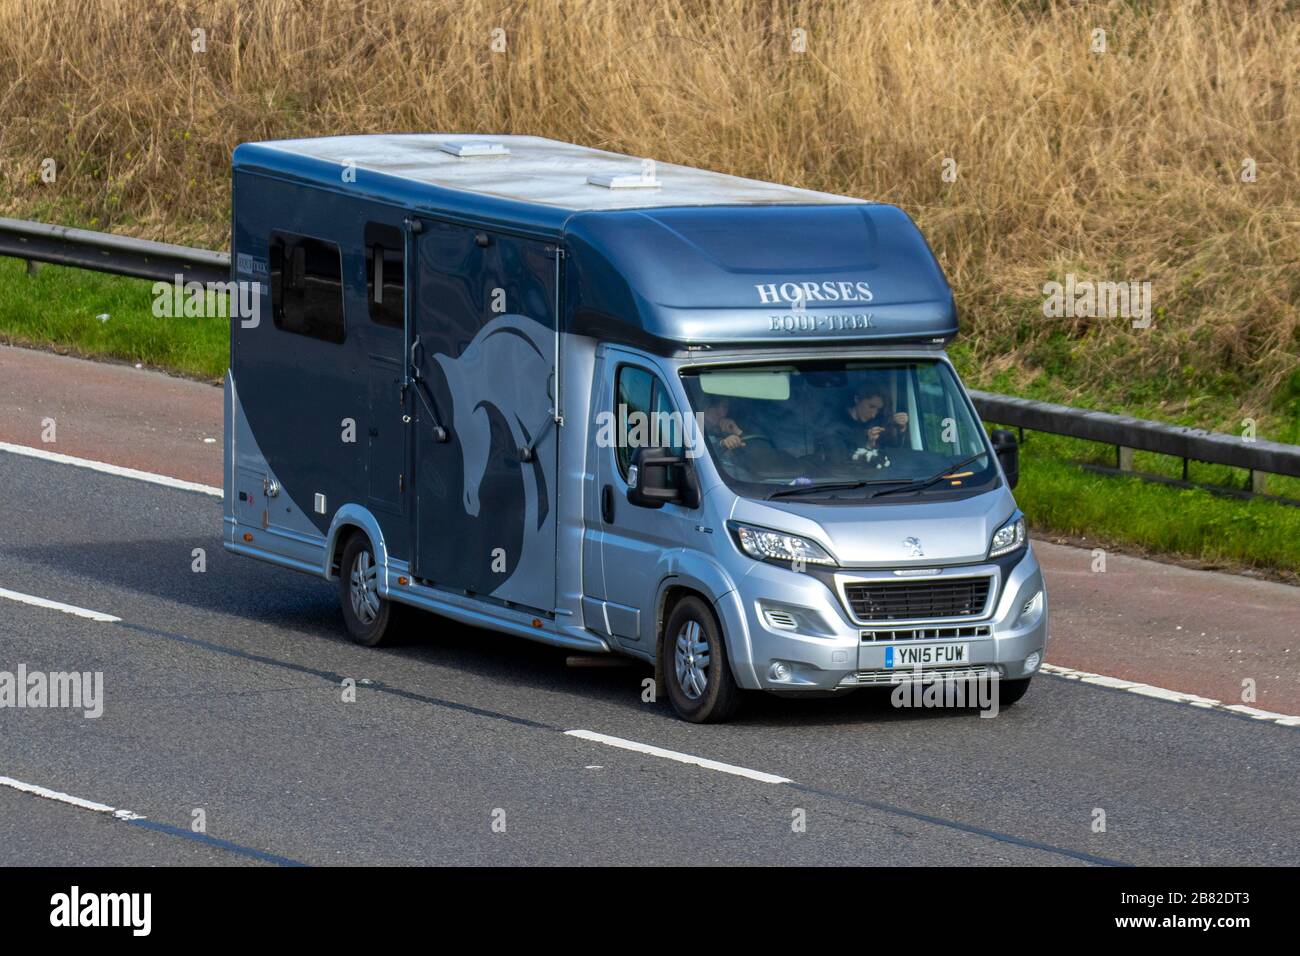 2015 silver Peugeot Boxer 440 Zuckoff HDI; Commercial vehicles, Equine animal transport on the M6 at Manchester. UK Stock Photo